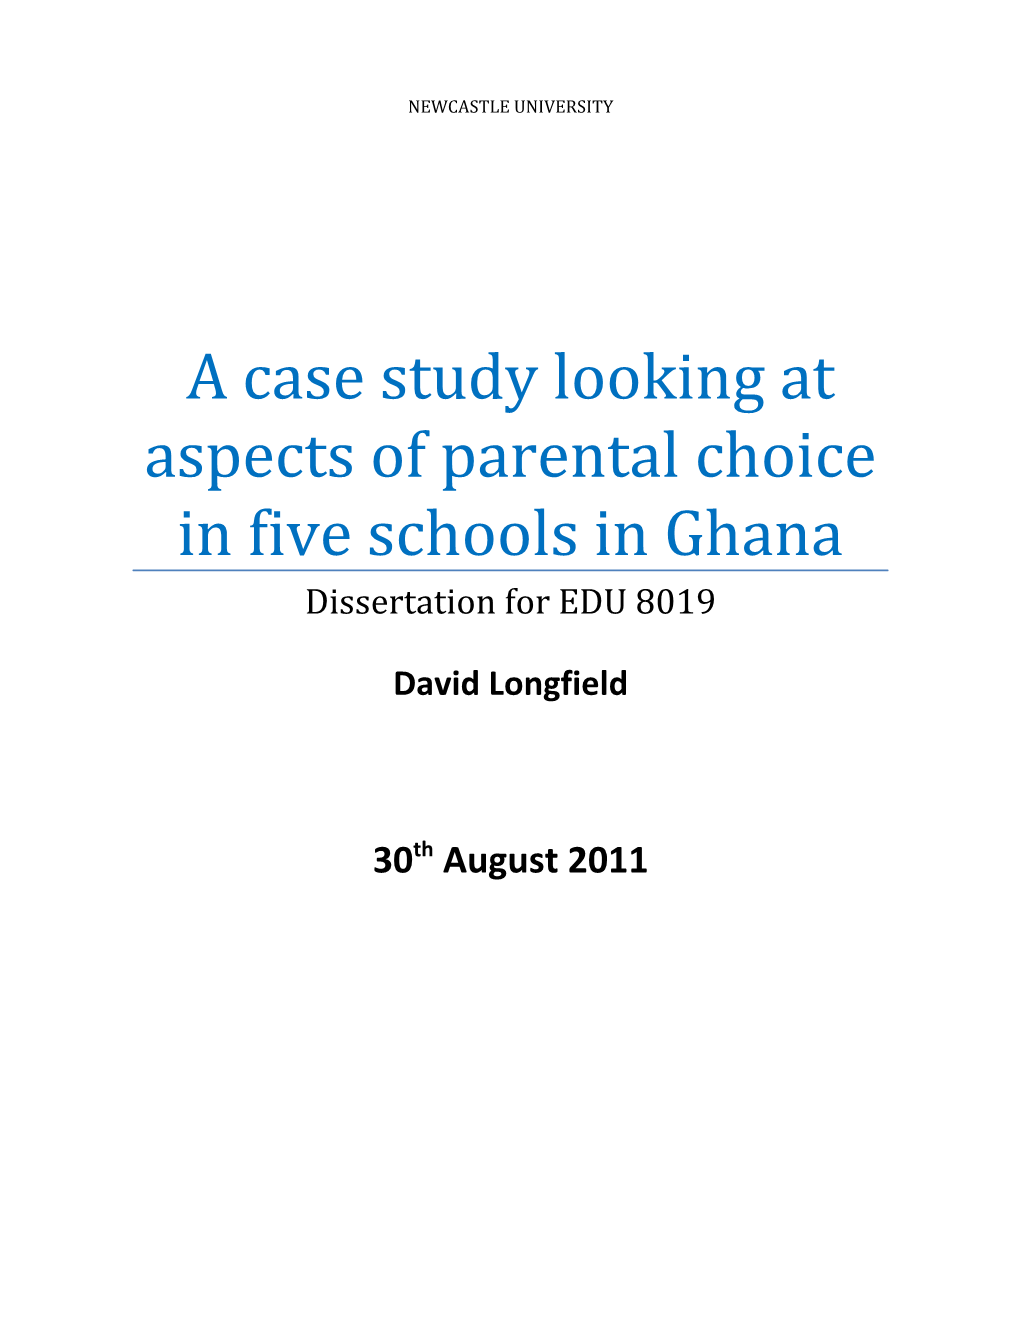 A Case Study Looking at Aspects of Parental Choice in Five Schools in Ghana